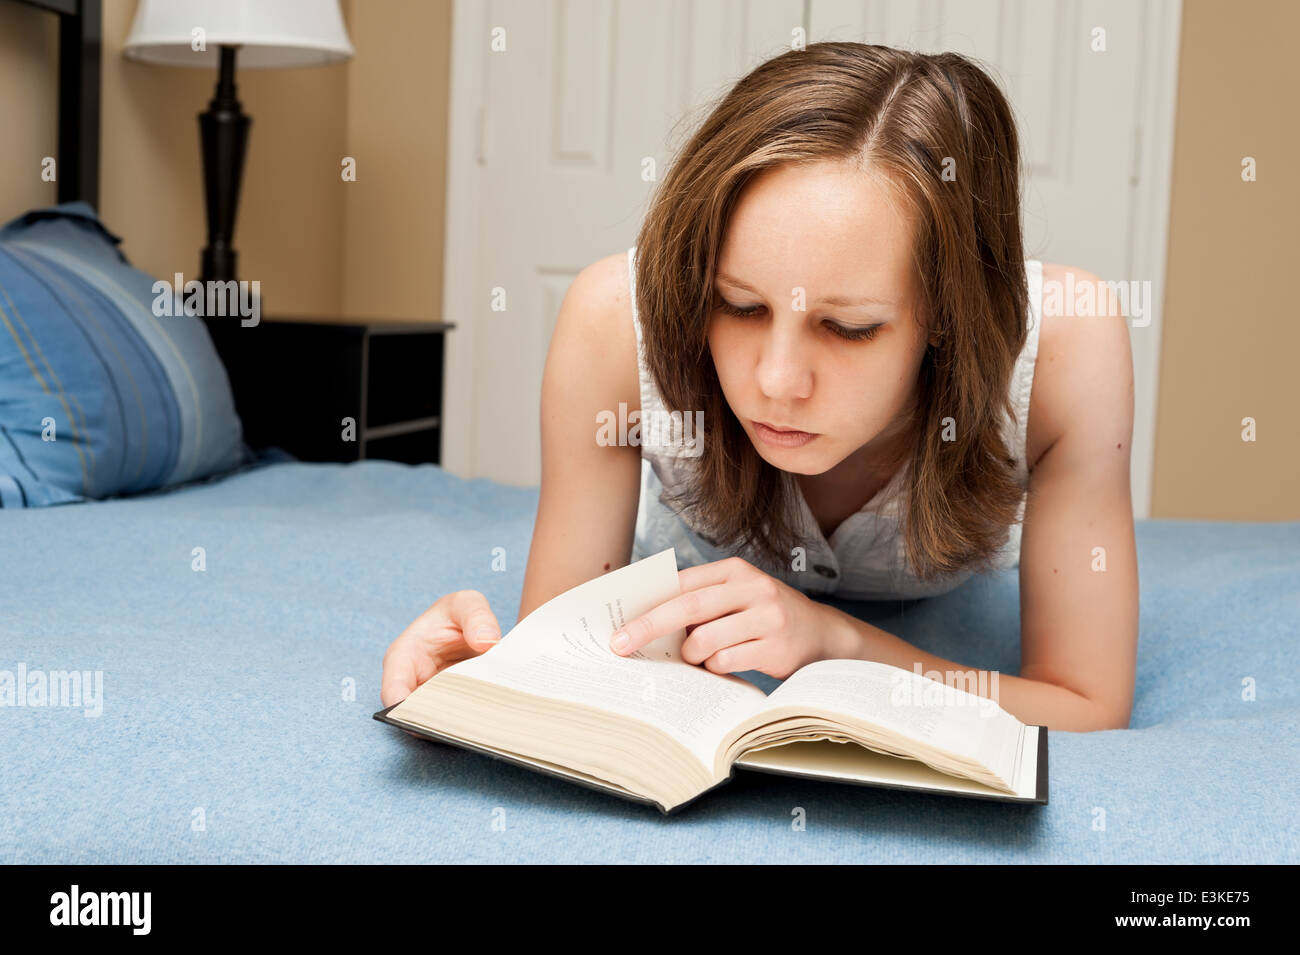 Student girl reading a book Stock Photo